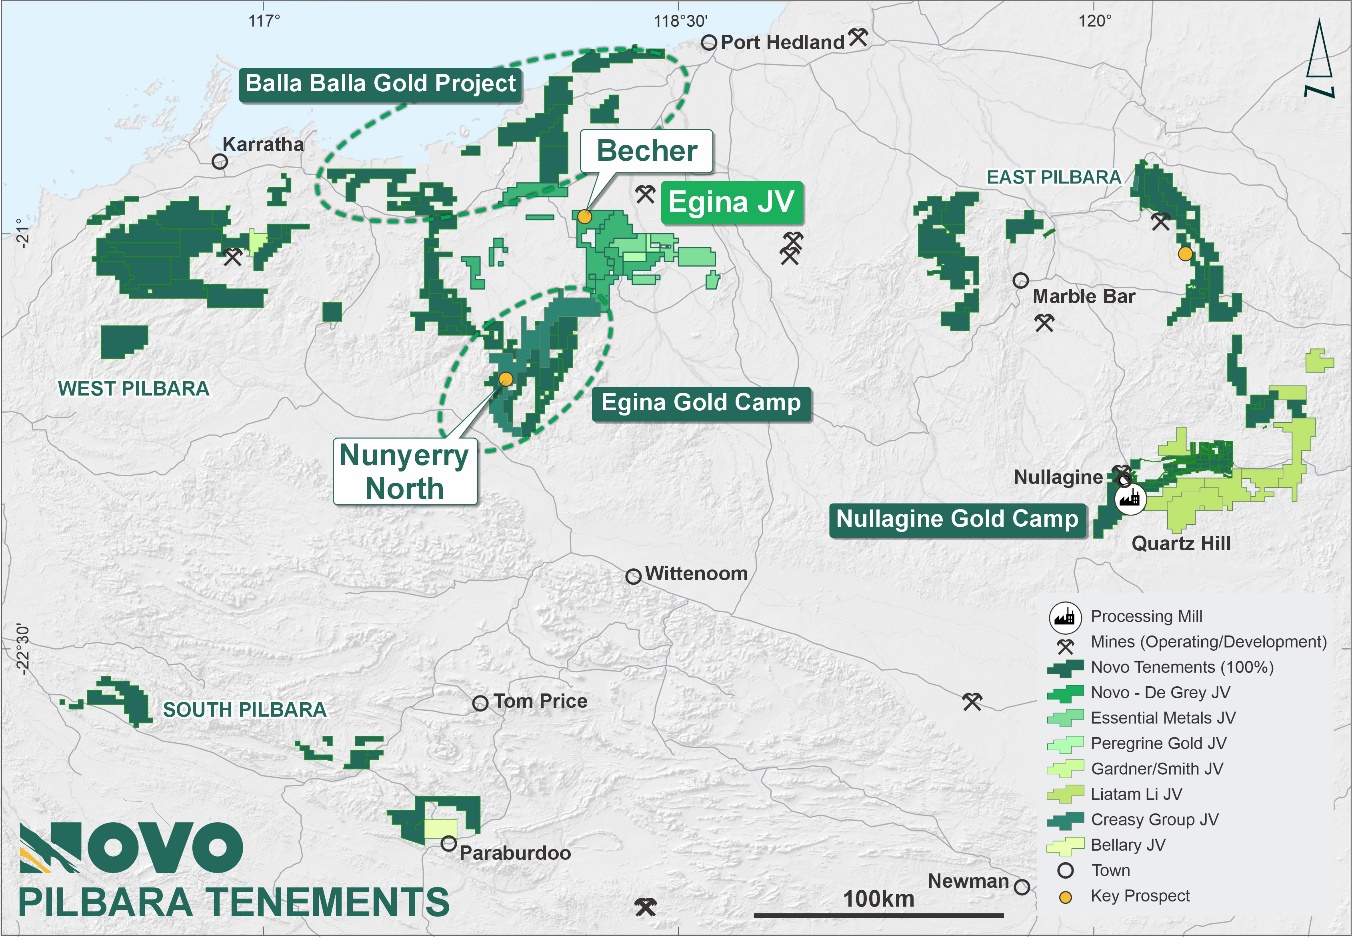 Figure 1: Novo’s Pilbara tenure showing priority prospects, joint venture interests and the location of drilling at Nunyerry North